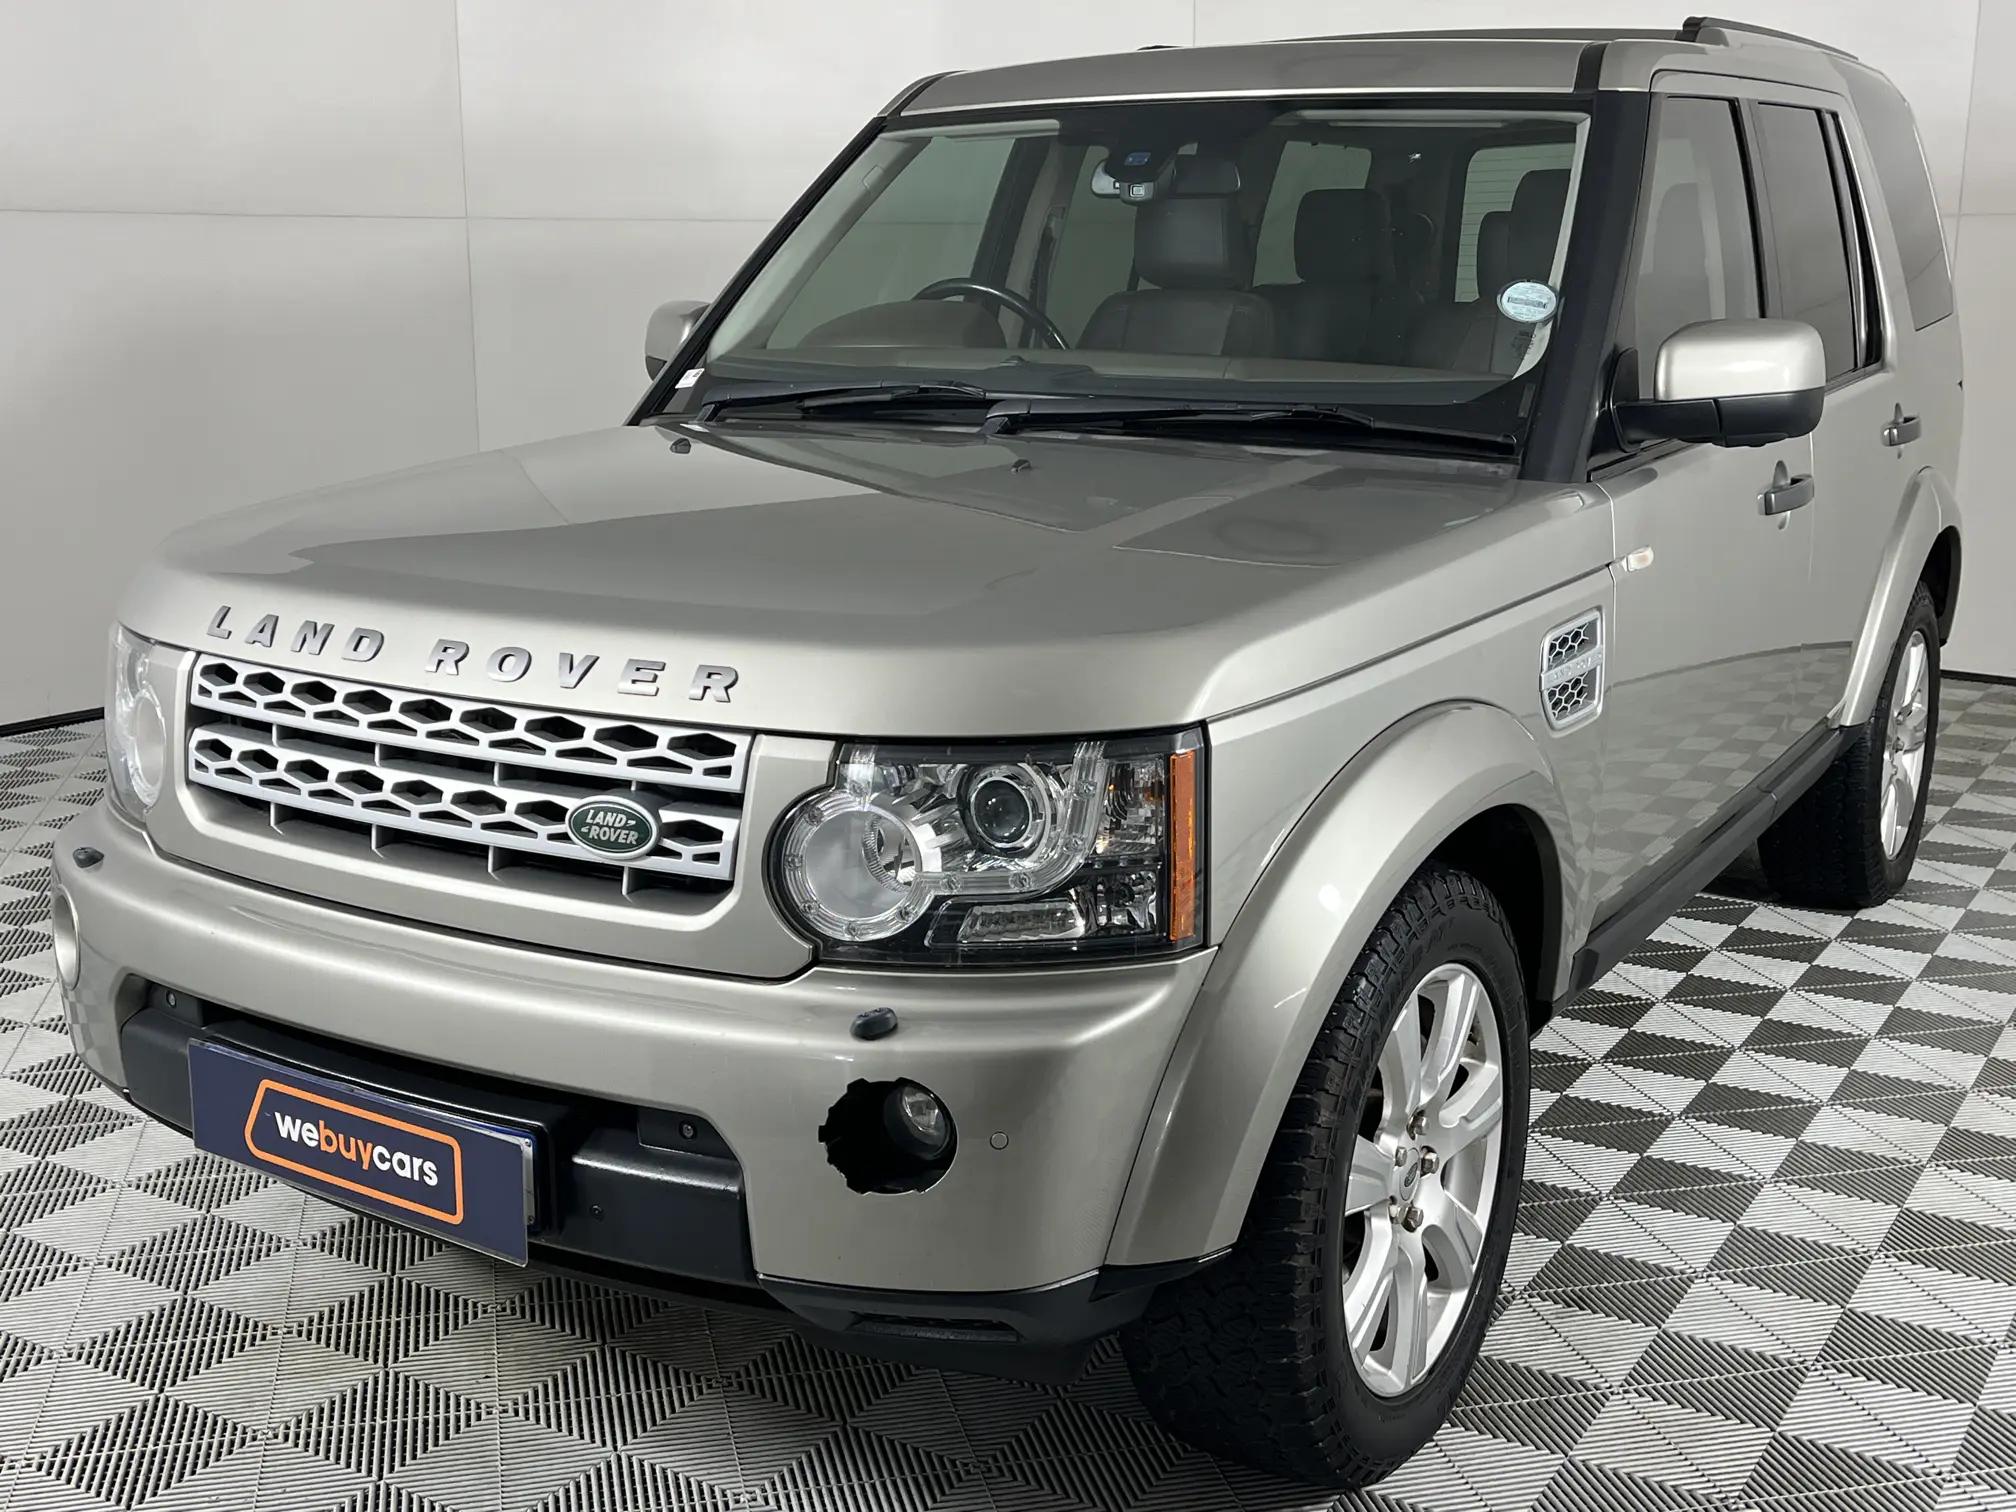 Land Rover Discovery 4 3.0 TD SD V6 HSE